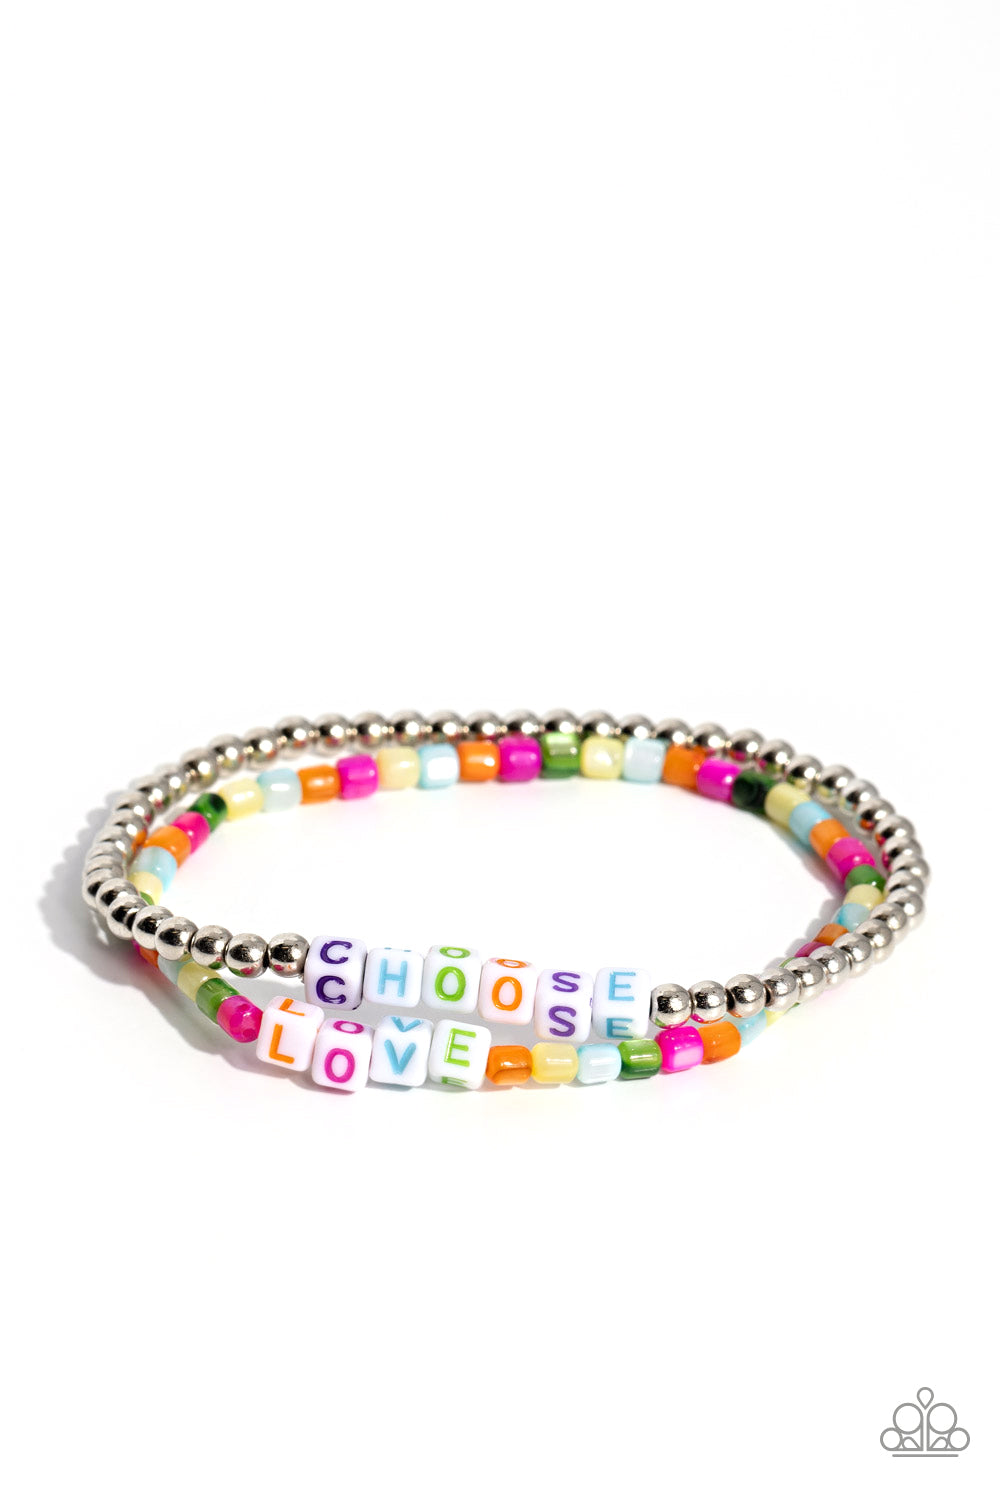 Chasing Love Multi Stretch Bracelet - Paparazzi Accessories  Infused with white cubed beads featuring purple, light blue, Classic Green, orange, and hot pink letters, a mismatched collection of silver and glassy multicolored beads are threaded along stretchy bands. Each multicolored letter on both stacks spells out the words "CHOOSE" and "LOVE", creating two inspirational layers around the wrist.  Sold as one set of two bracelets.  Sku:  P9WD-MTXX-062XX